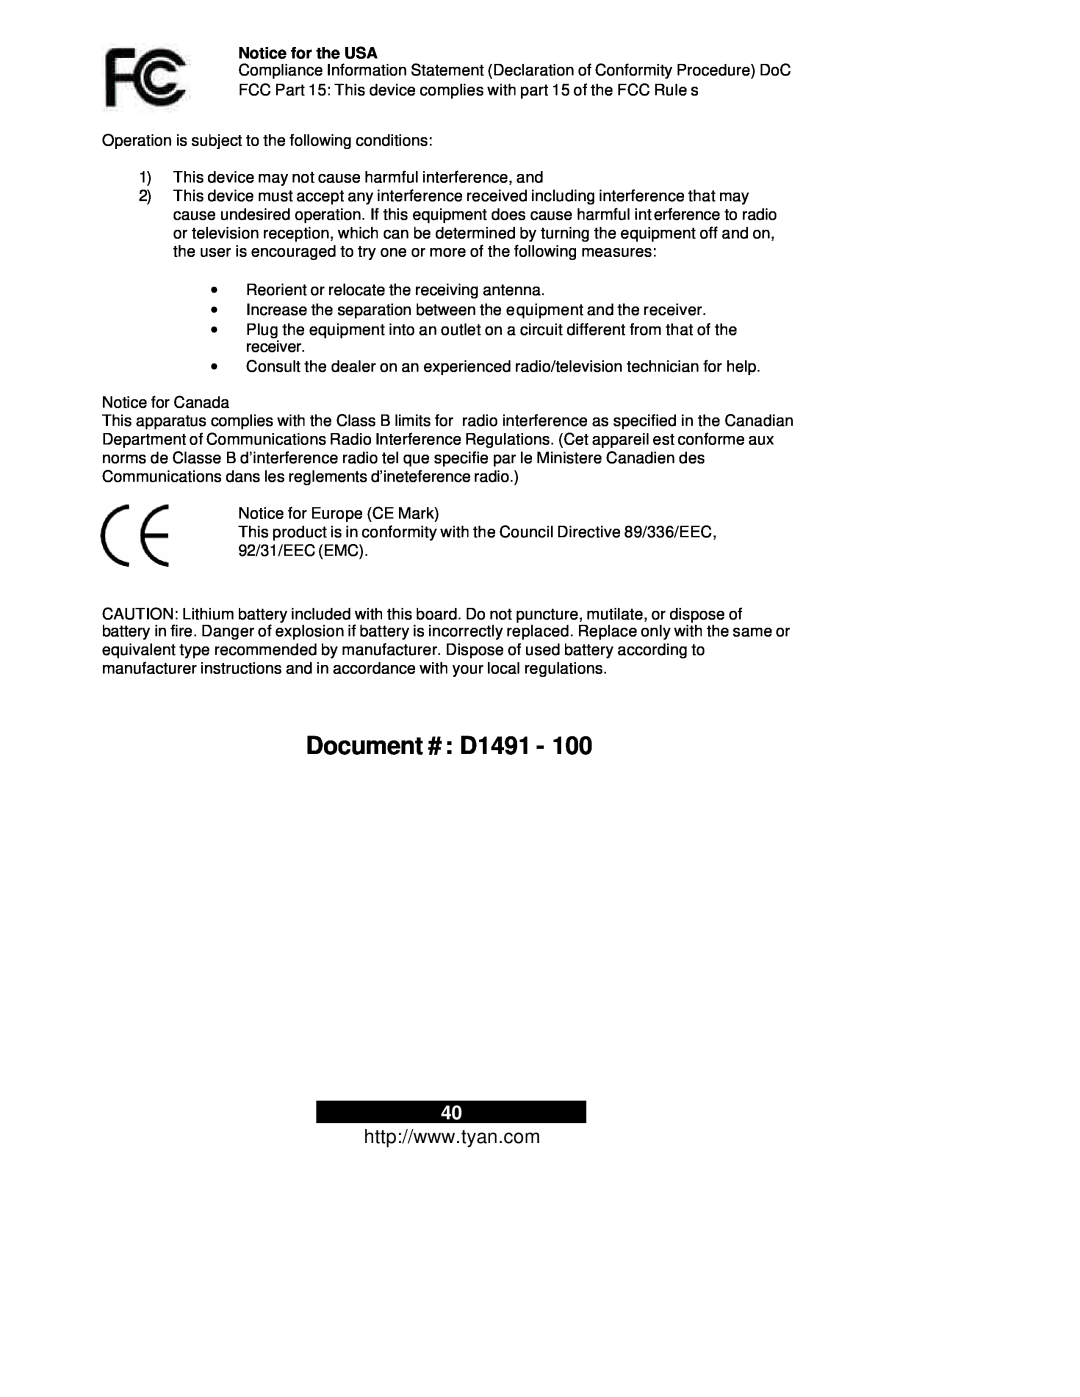 Tyan Computer S2665, Thunder i7505 warranty Document # D1491, Notice for the USA 